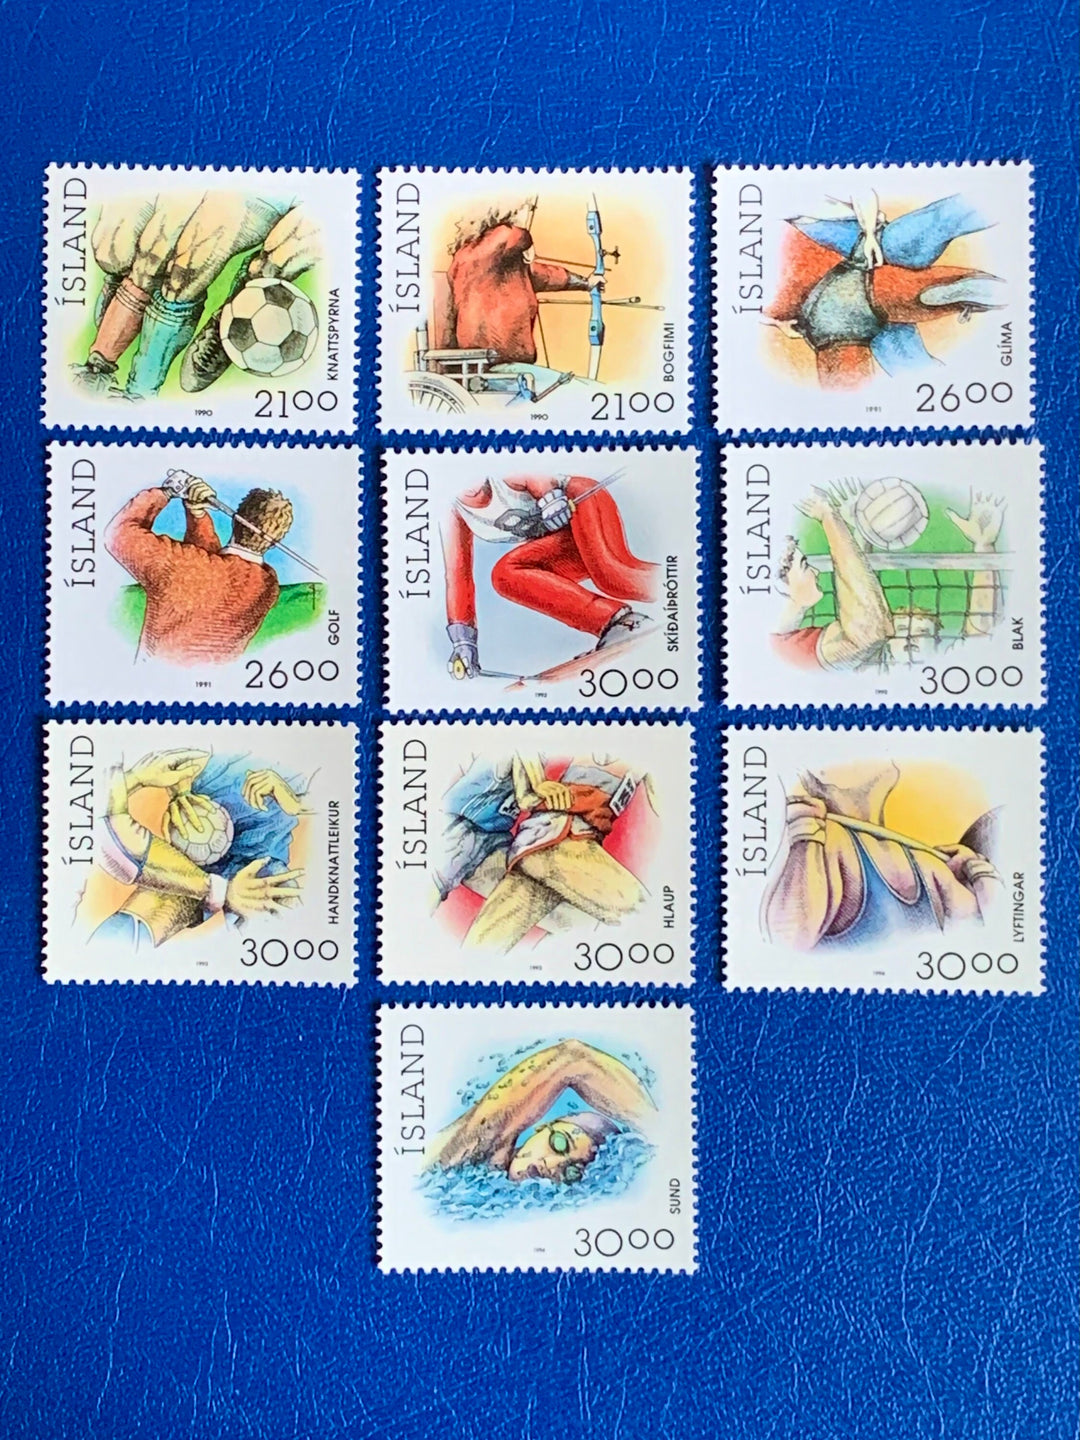 Iceland -Original Vintage Postage Stamps- 1990-94 Icelandic Sports - for the collector, artist or crafter